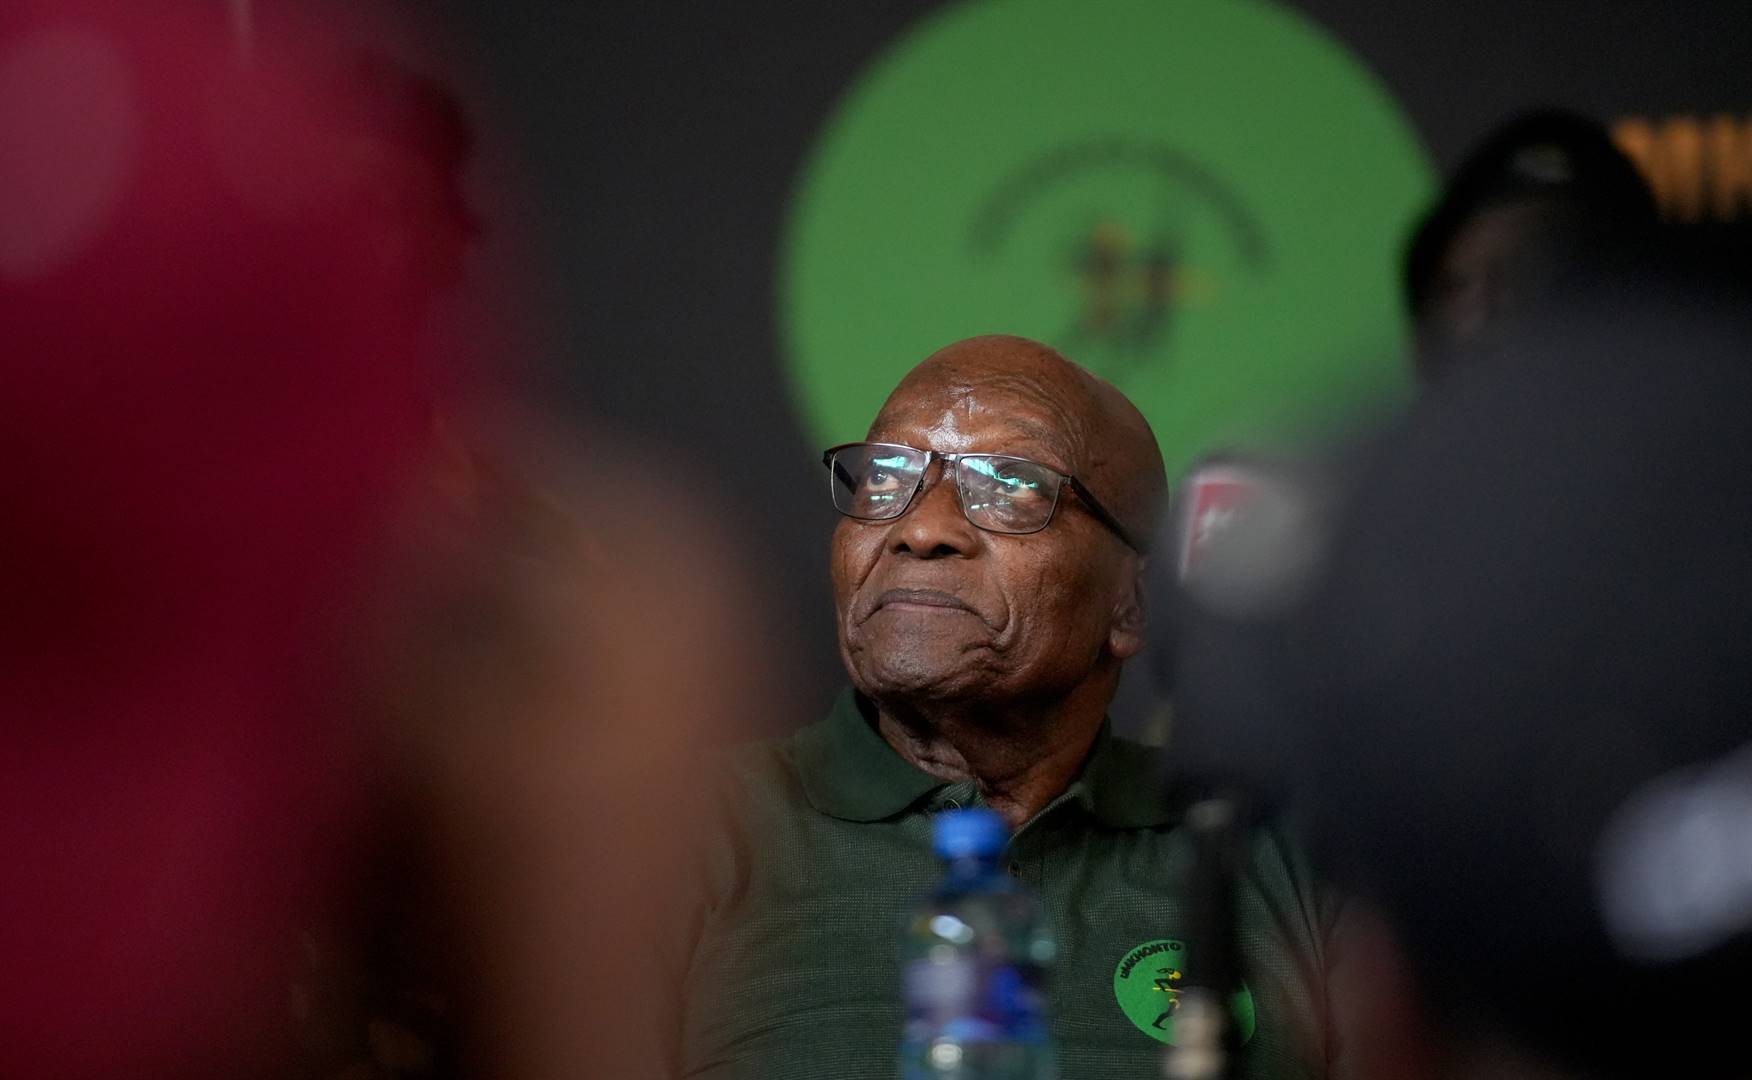 Since leaving office, Jacob Zuma has buzzed around like a persistent, annoying insect.